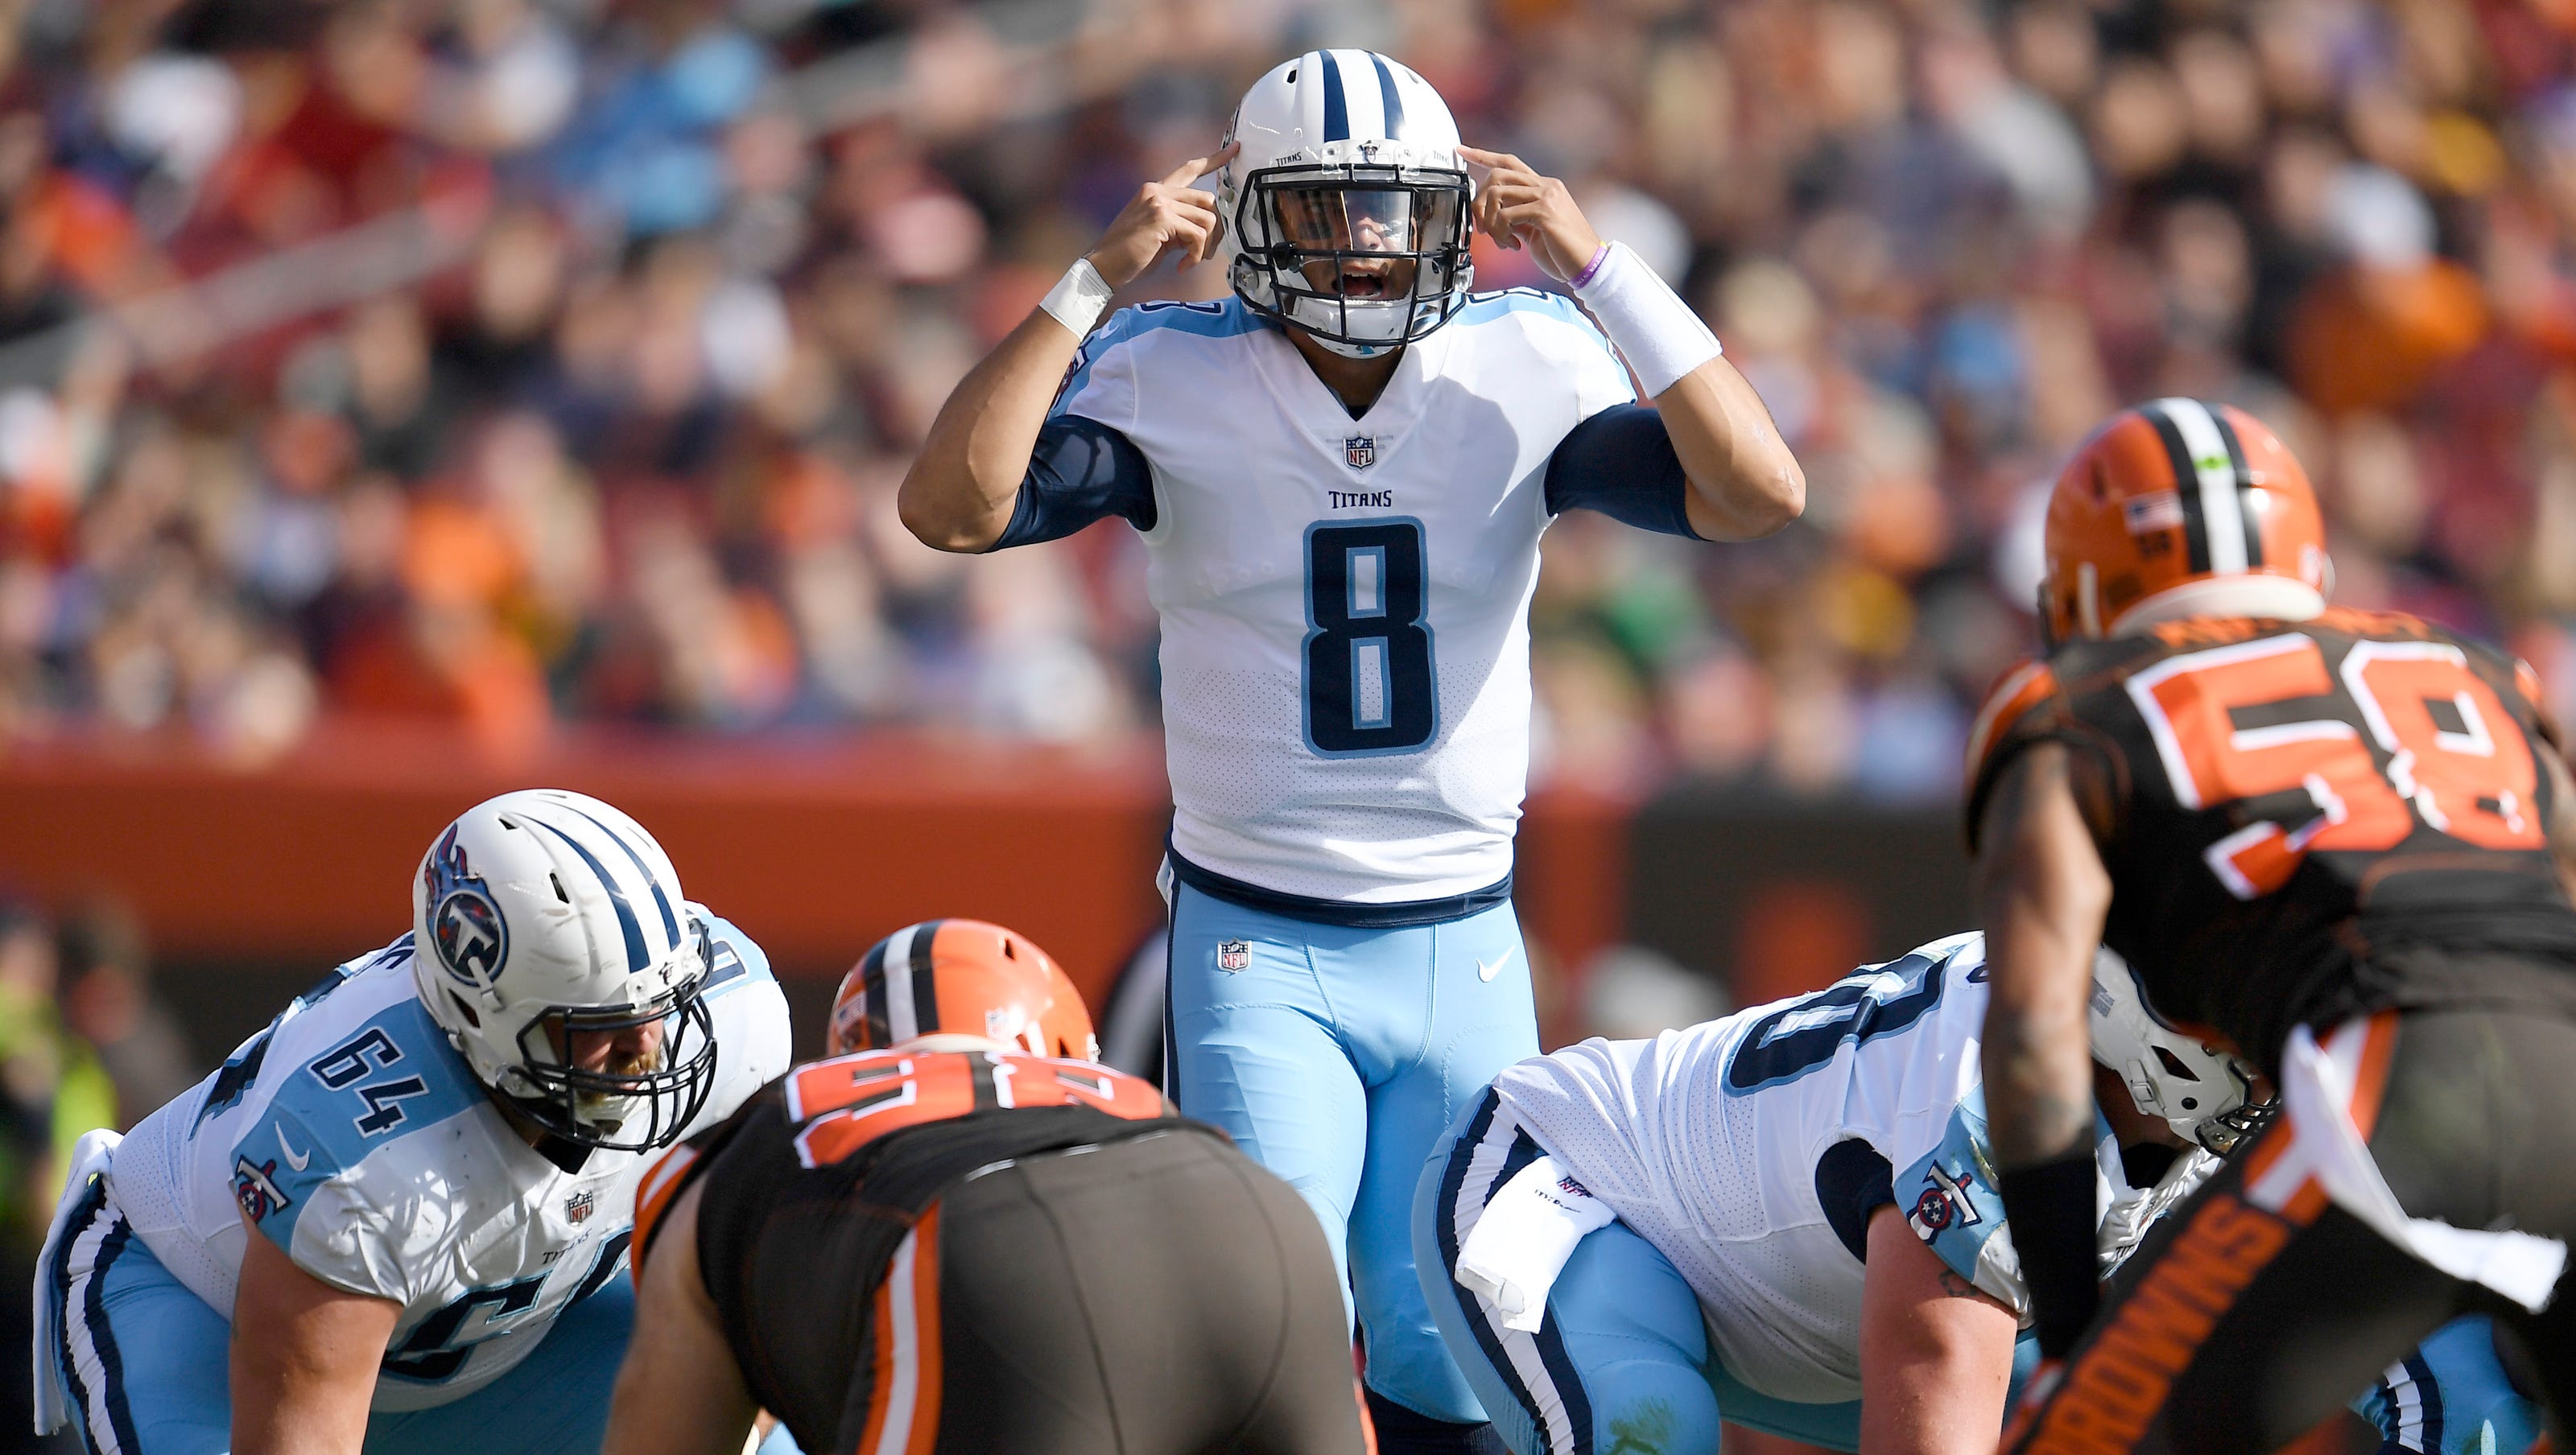 Titans red zone offense, third down conversion rate among worst in NFL